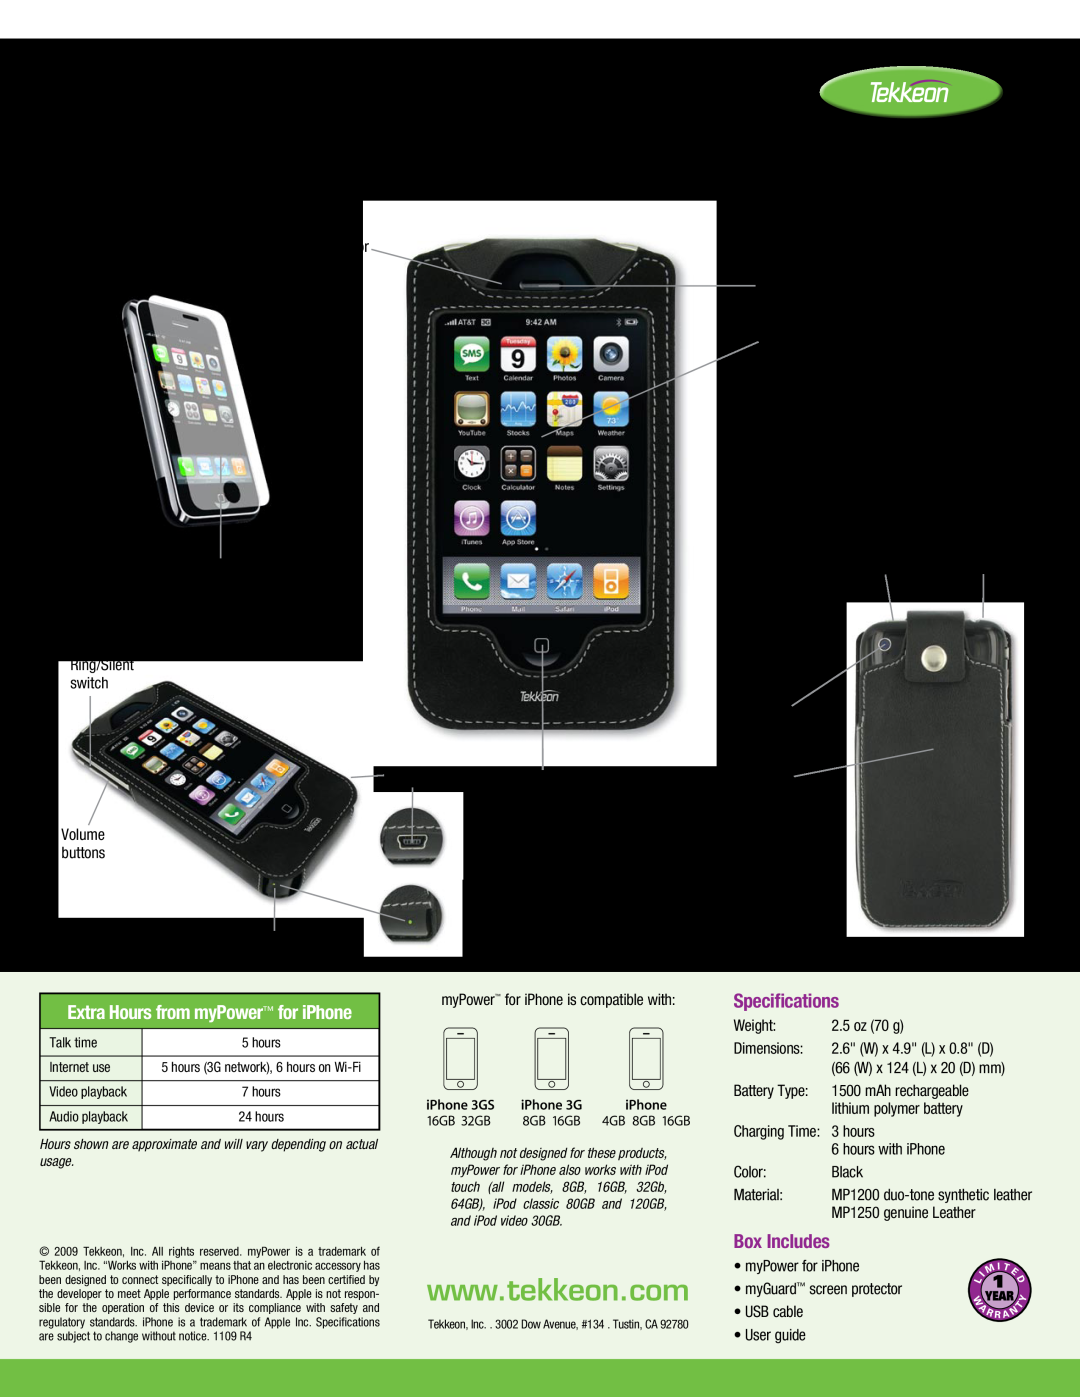 Tekkeon MP1250, MP1200 Power, charge and sync your iPhone, myPower for iPhone, Specifications, Box Includes, Mini USB port 